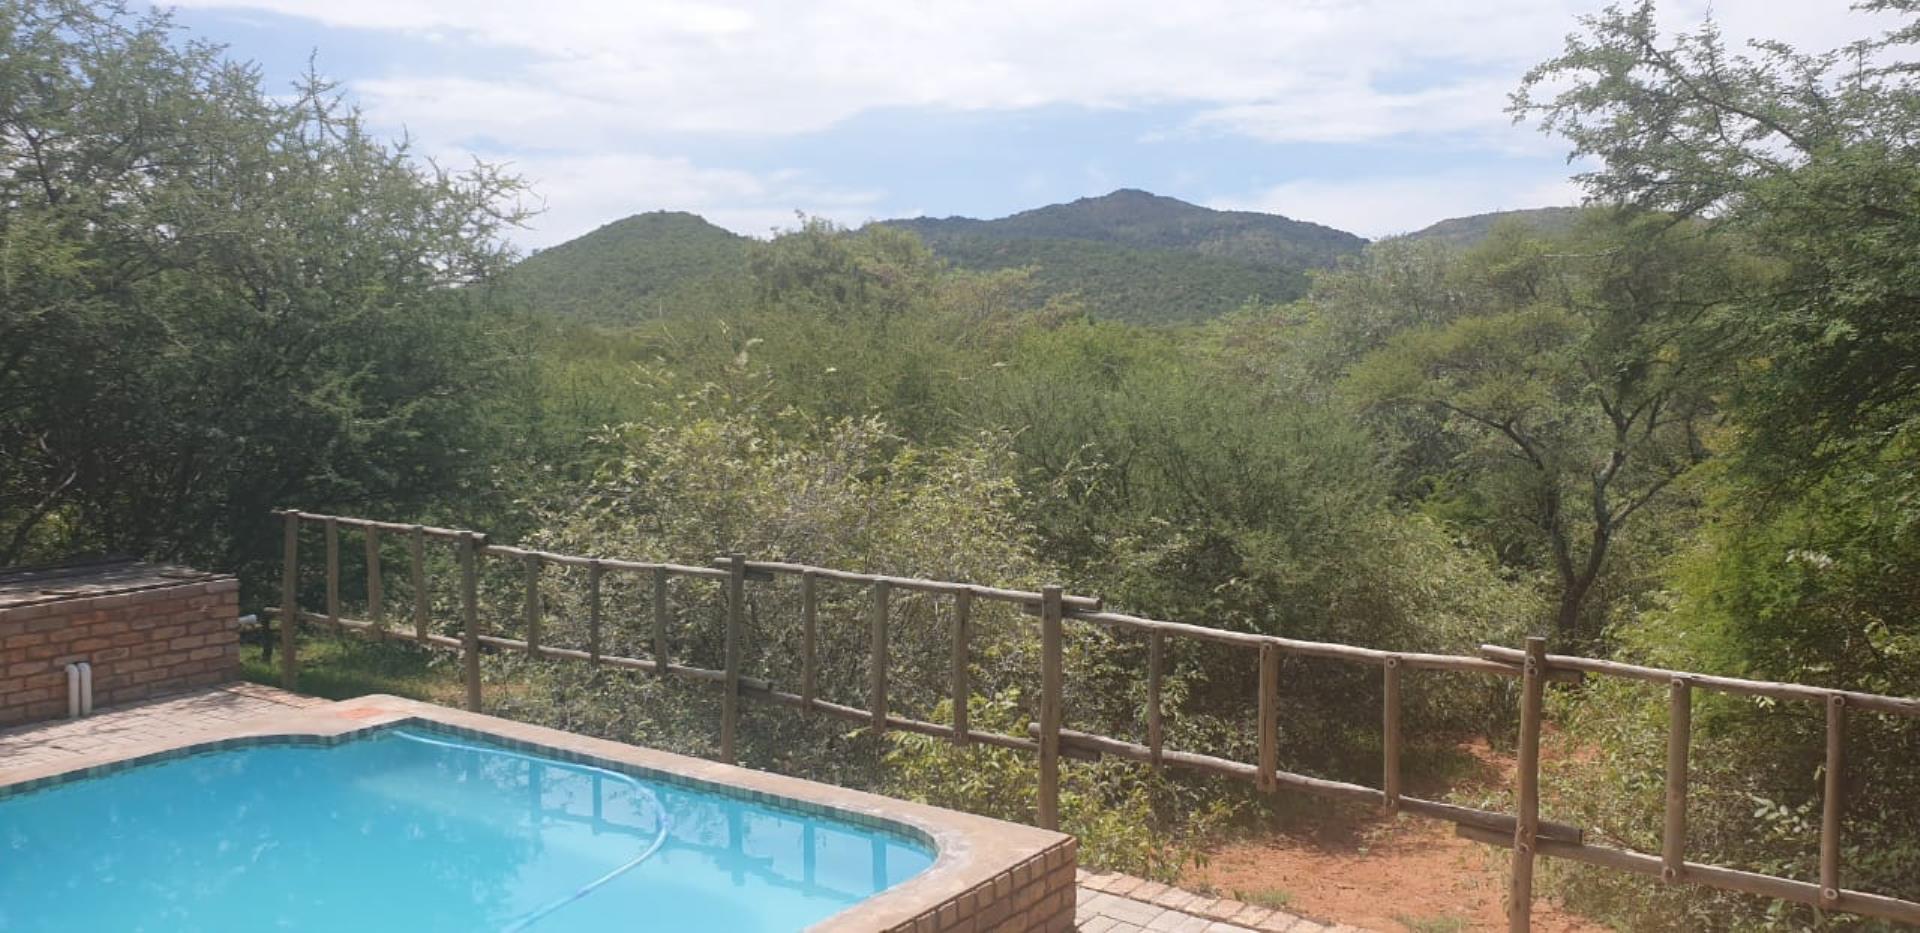 4 Bedroom House for Sale - Limpopo